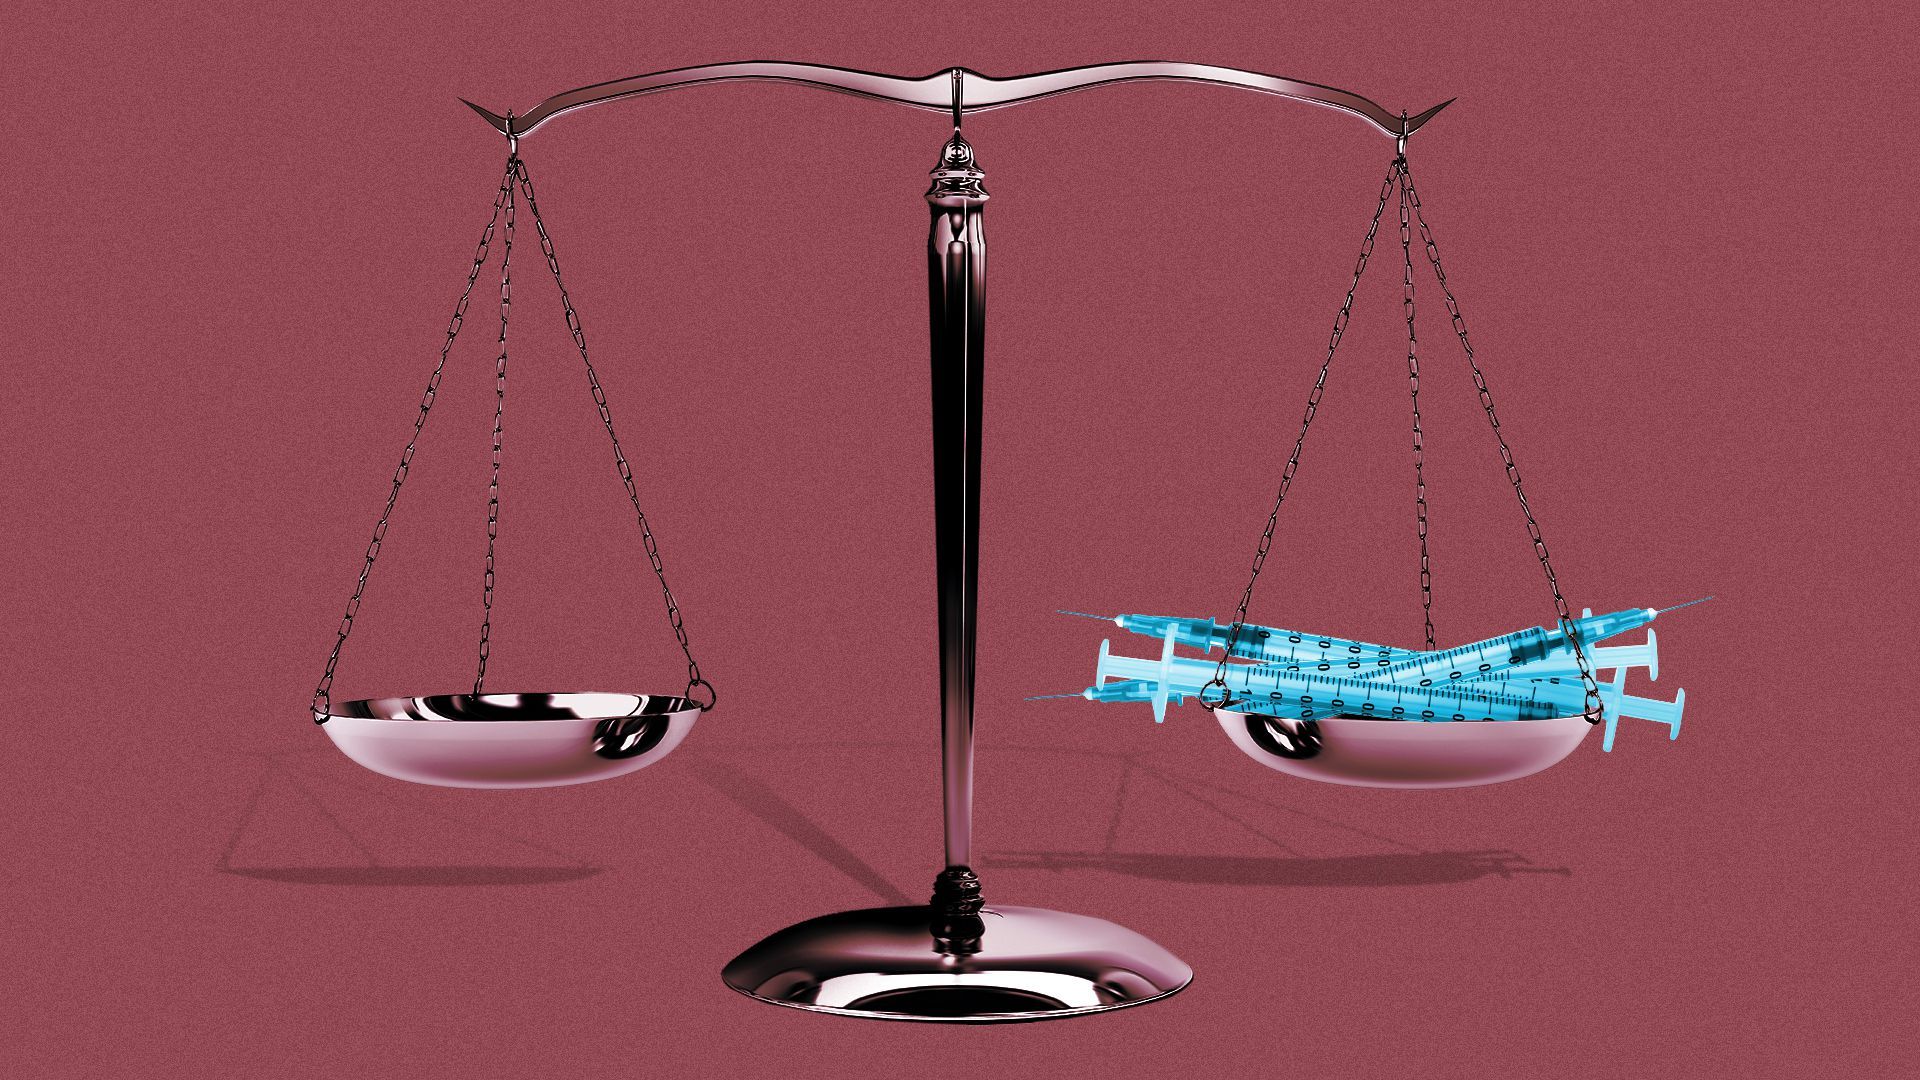  Illustration of scales of justice weighing vaccine syringes.